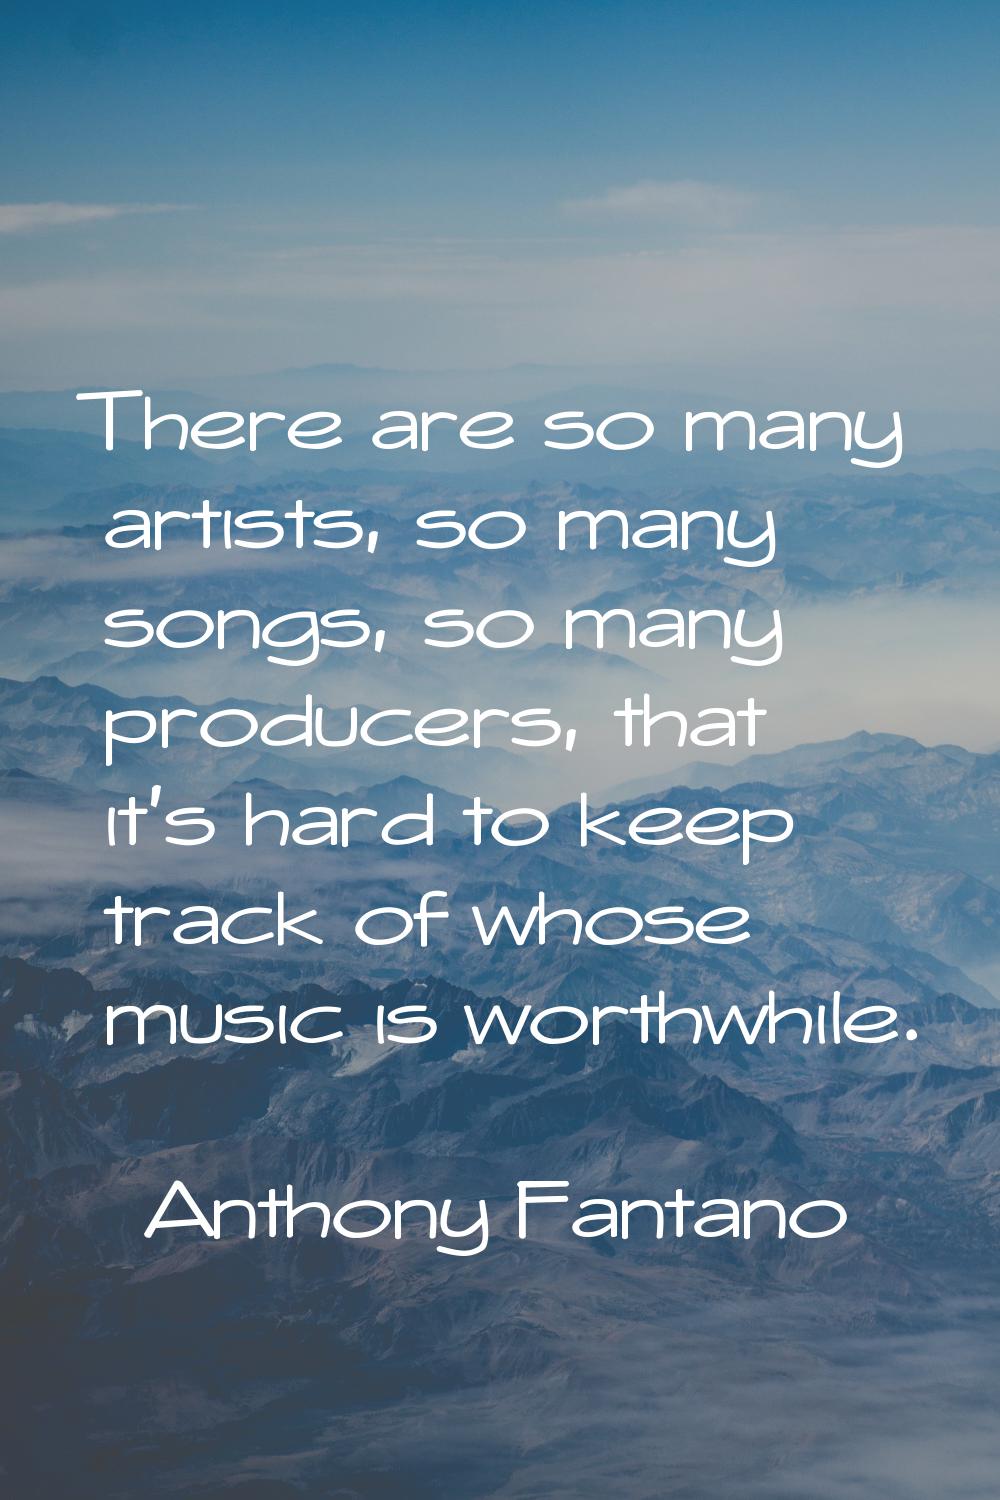 There are so many artists, so many songs, so many producers, that it's hard to keep track of whose 